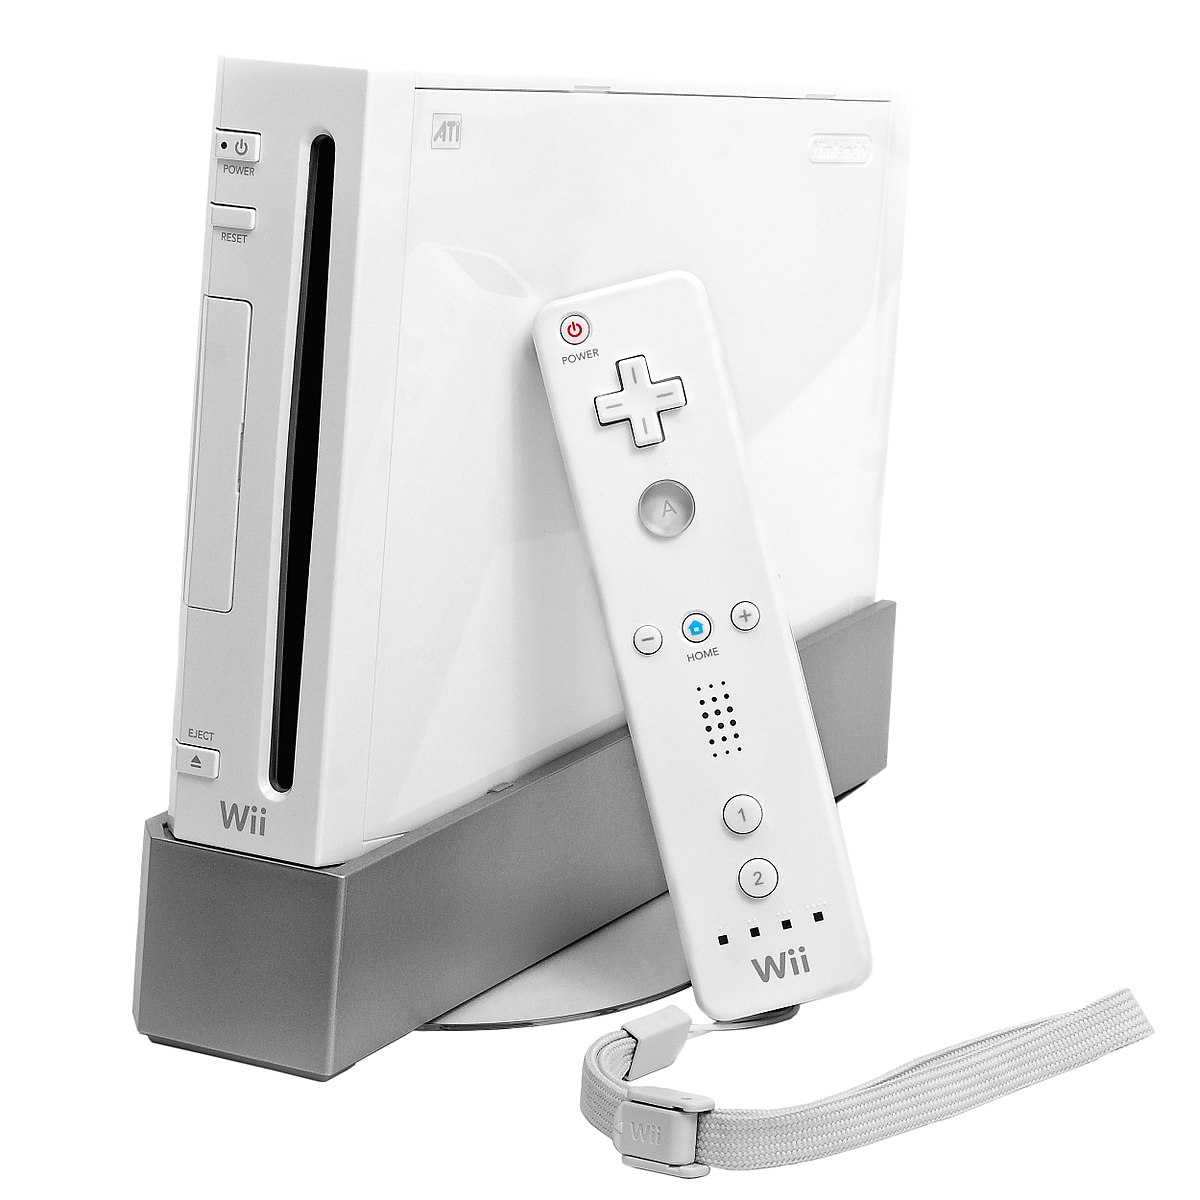 wii console - Power Reset Power Home Eject Wii Wii Wii